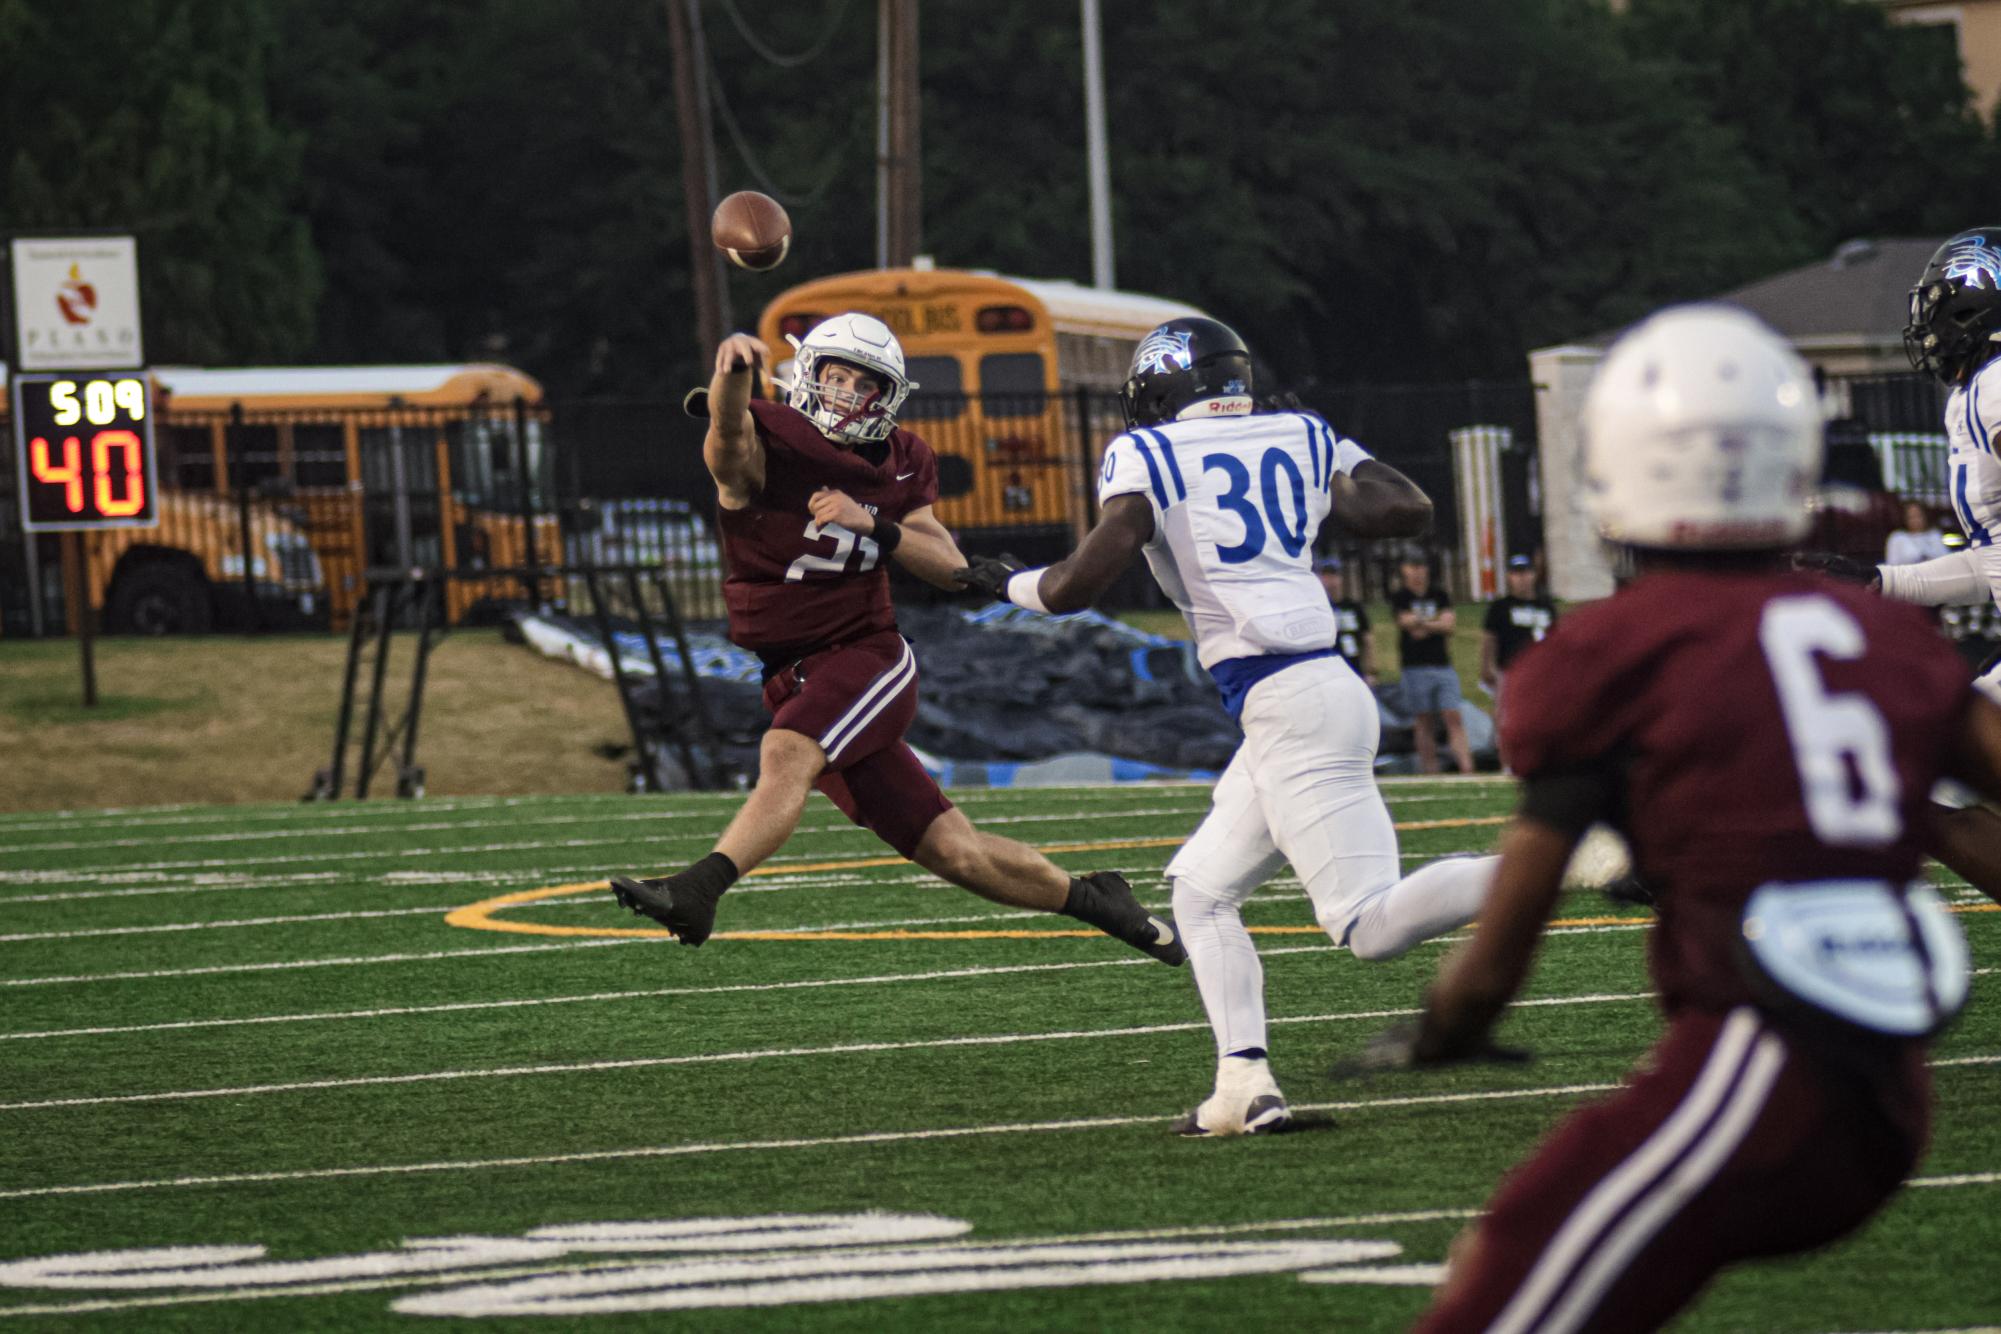 Bobcats Breeze Past the Wildcats- Student Review of First Football Game